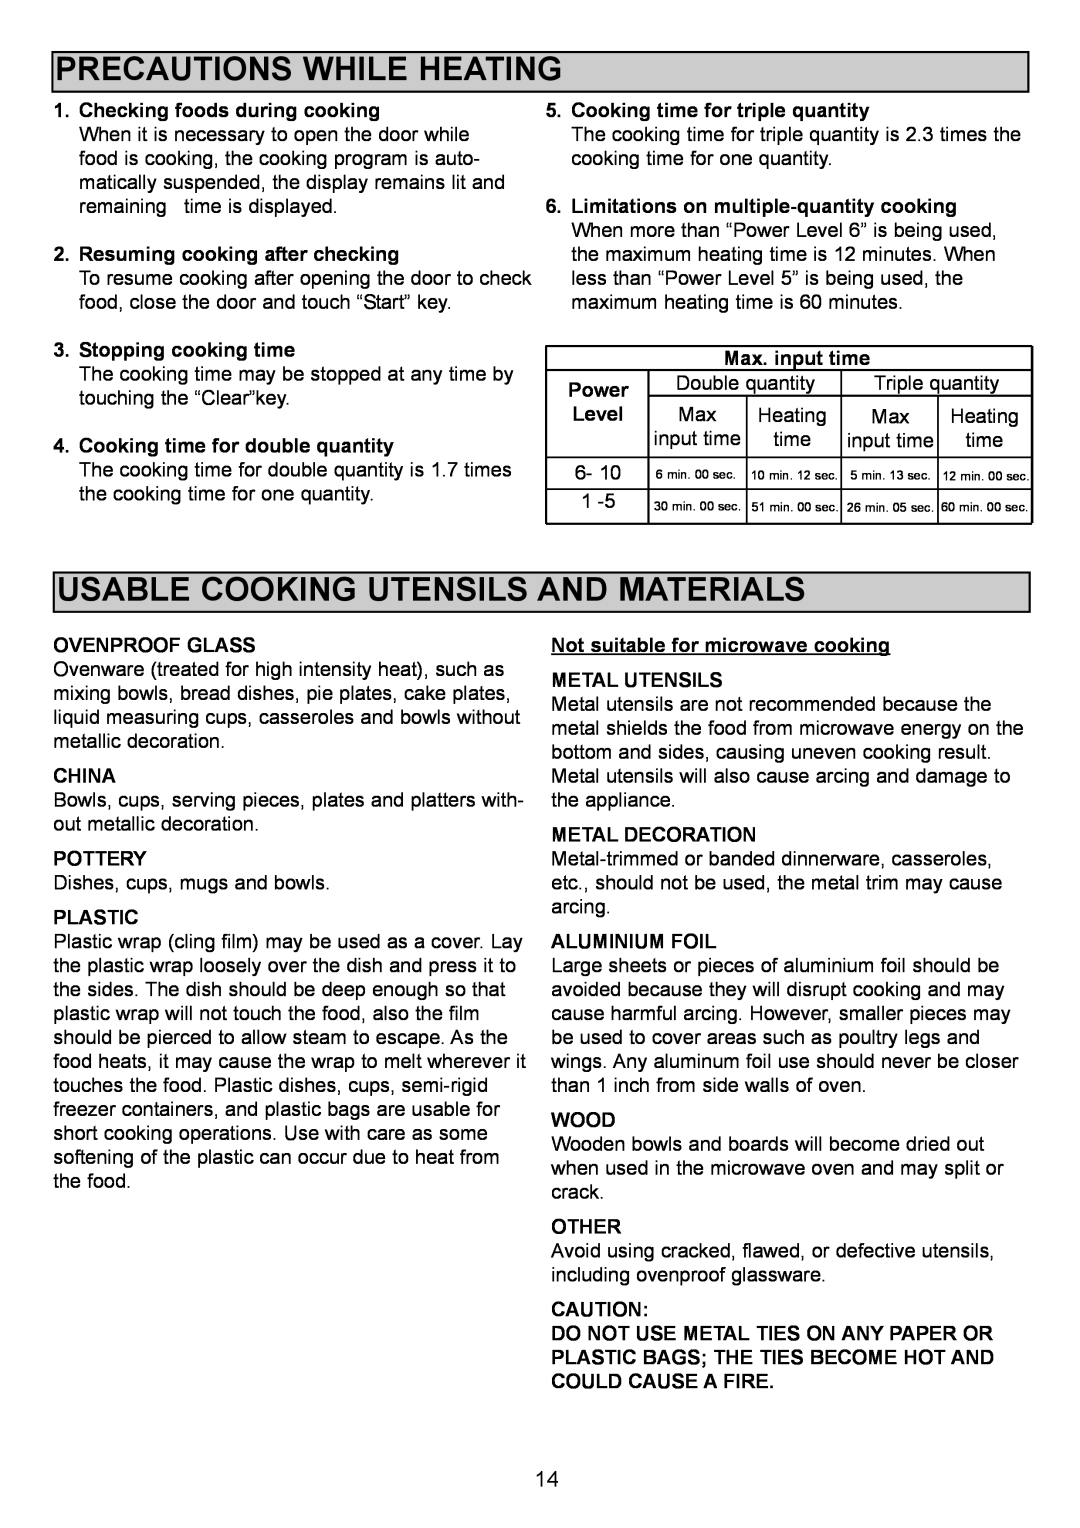 Sanyo EM-S1000 instruction manual Precautions While Heating, Usable Cooking Utensils And Materials 